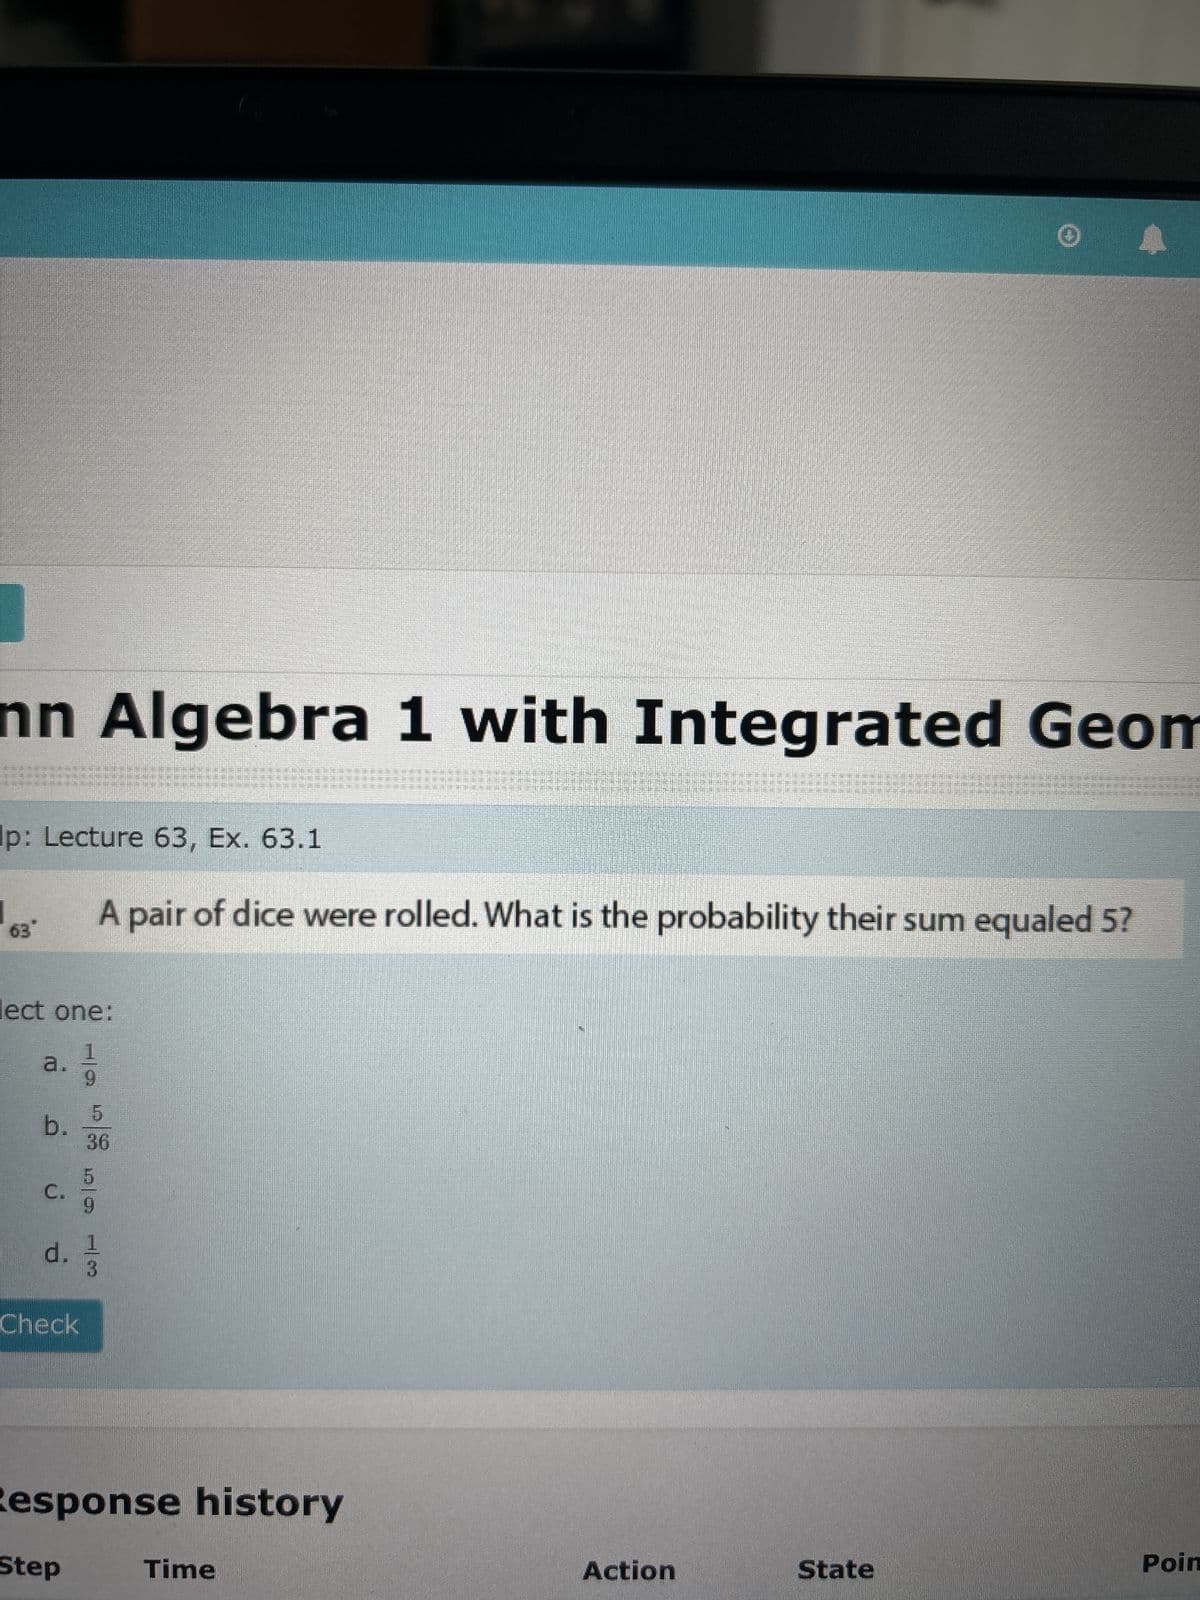 nn Algebra 1 with Integrated Geom
Ip: Lecture 63, Ex. 63.1
63
A pair of dice were rolled. What is the probability their sum equaled 5?
lect one:
1
a.
9
b.
d. 1
ه ن فــ
5
36
5
Check
3
Response history
Step
Time
Action
State
Poin